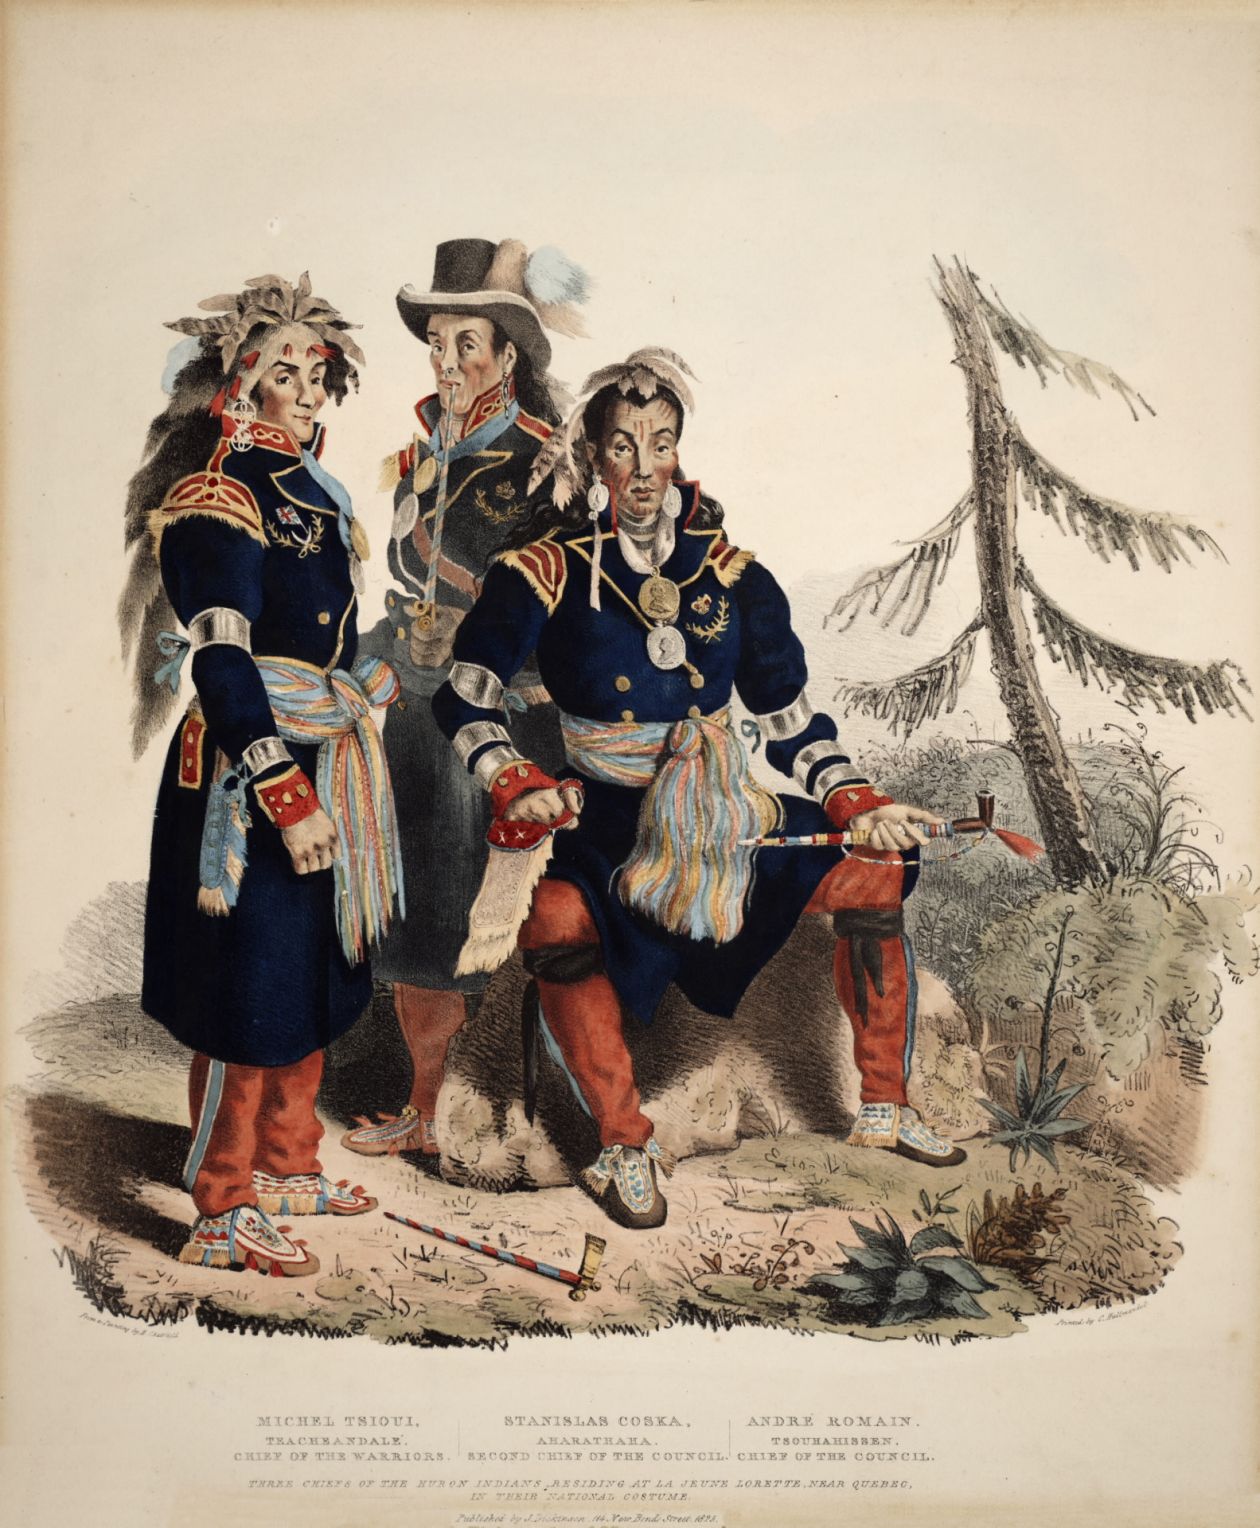 A drawing of Three Chiefs of the Huron Indians, Residing at La Jeune Lorette from 1825 by Charles Joseph Hullmandel